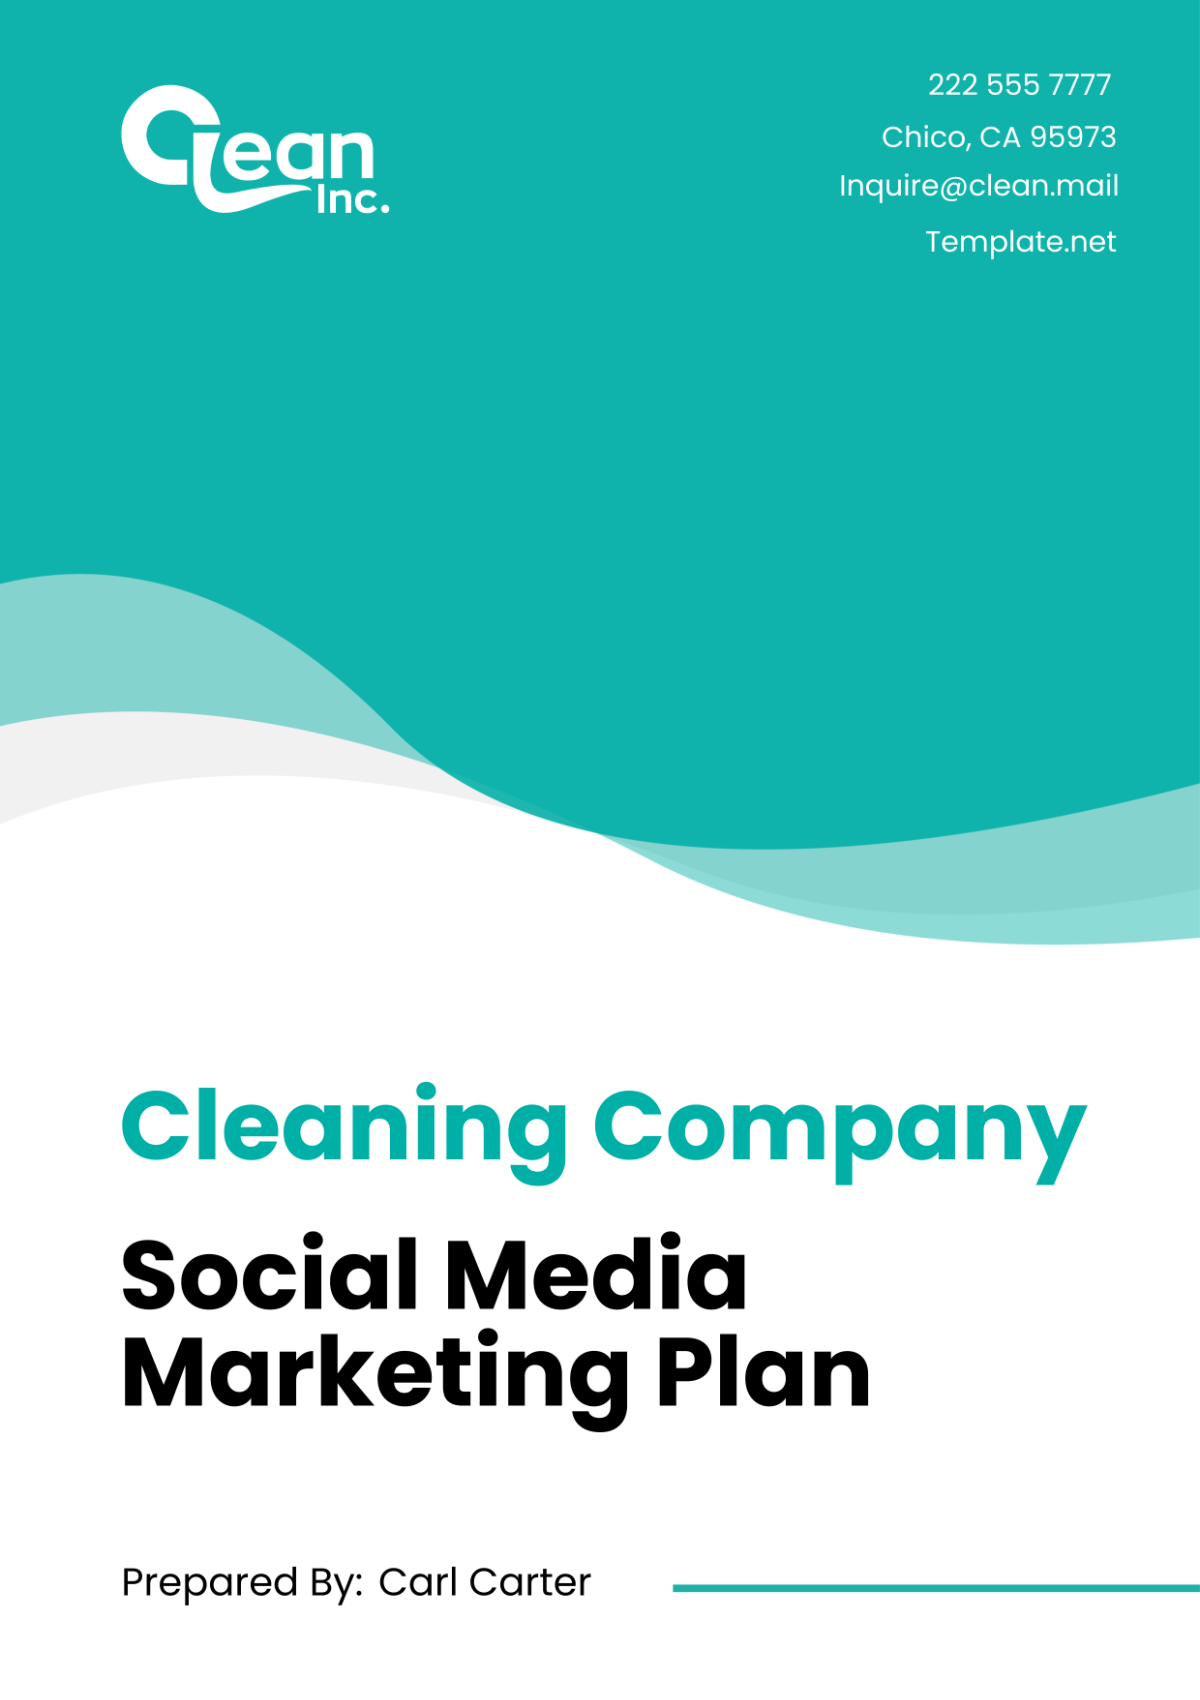 Cleaning Company Social Media Marketing Plan Template